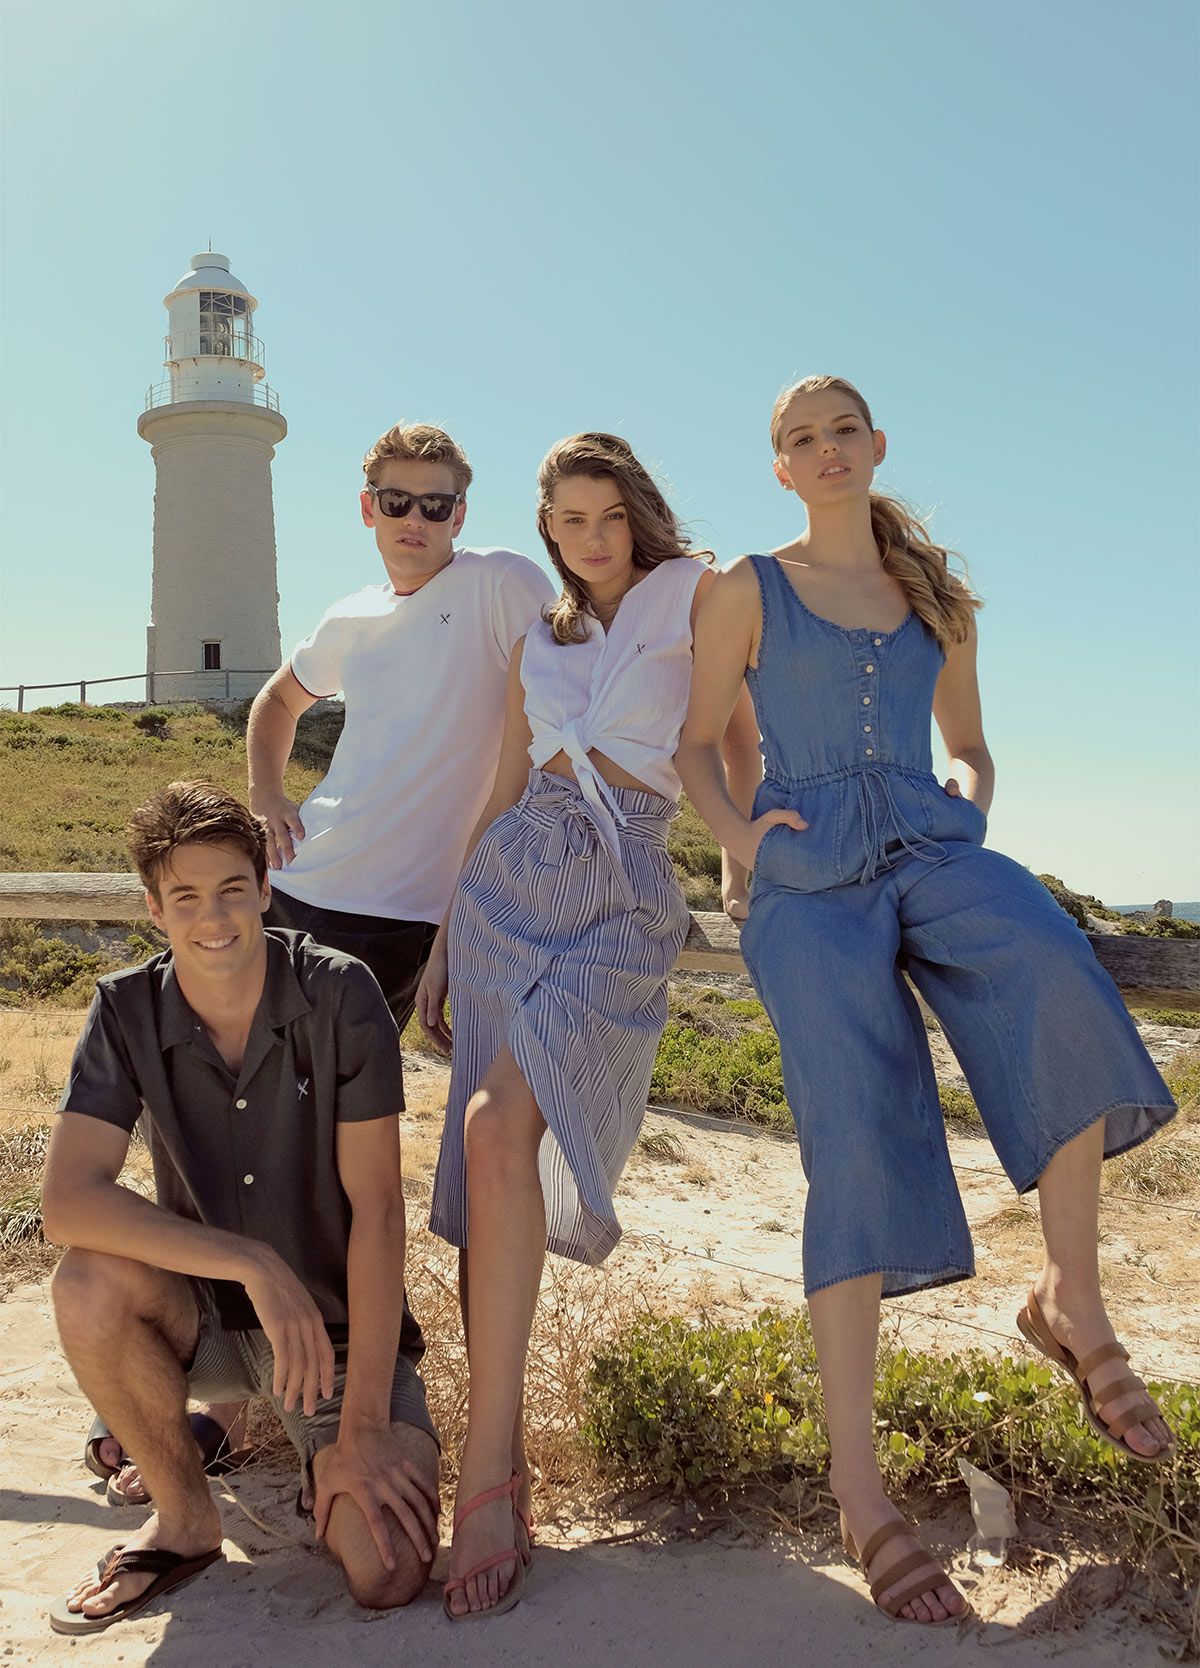 Look and stay cool under the sun with the Regatta summer collection